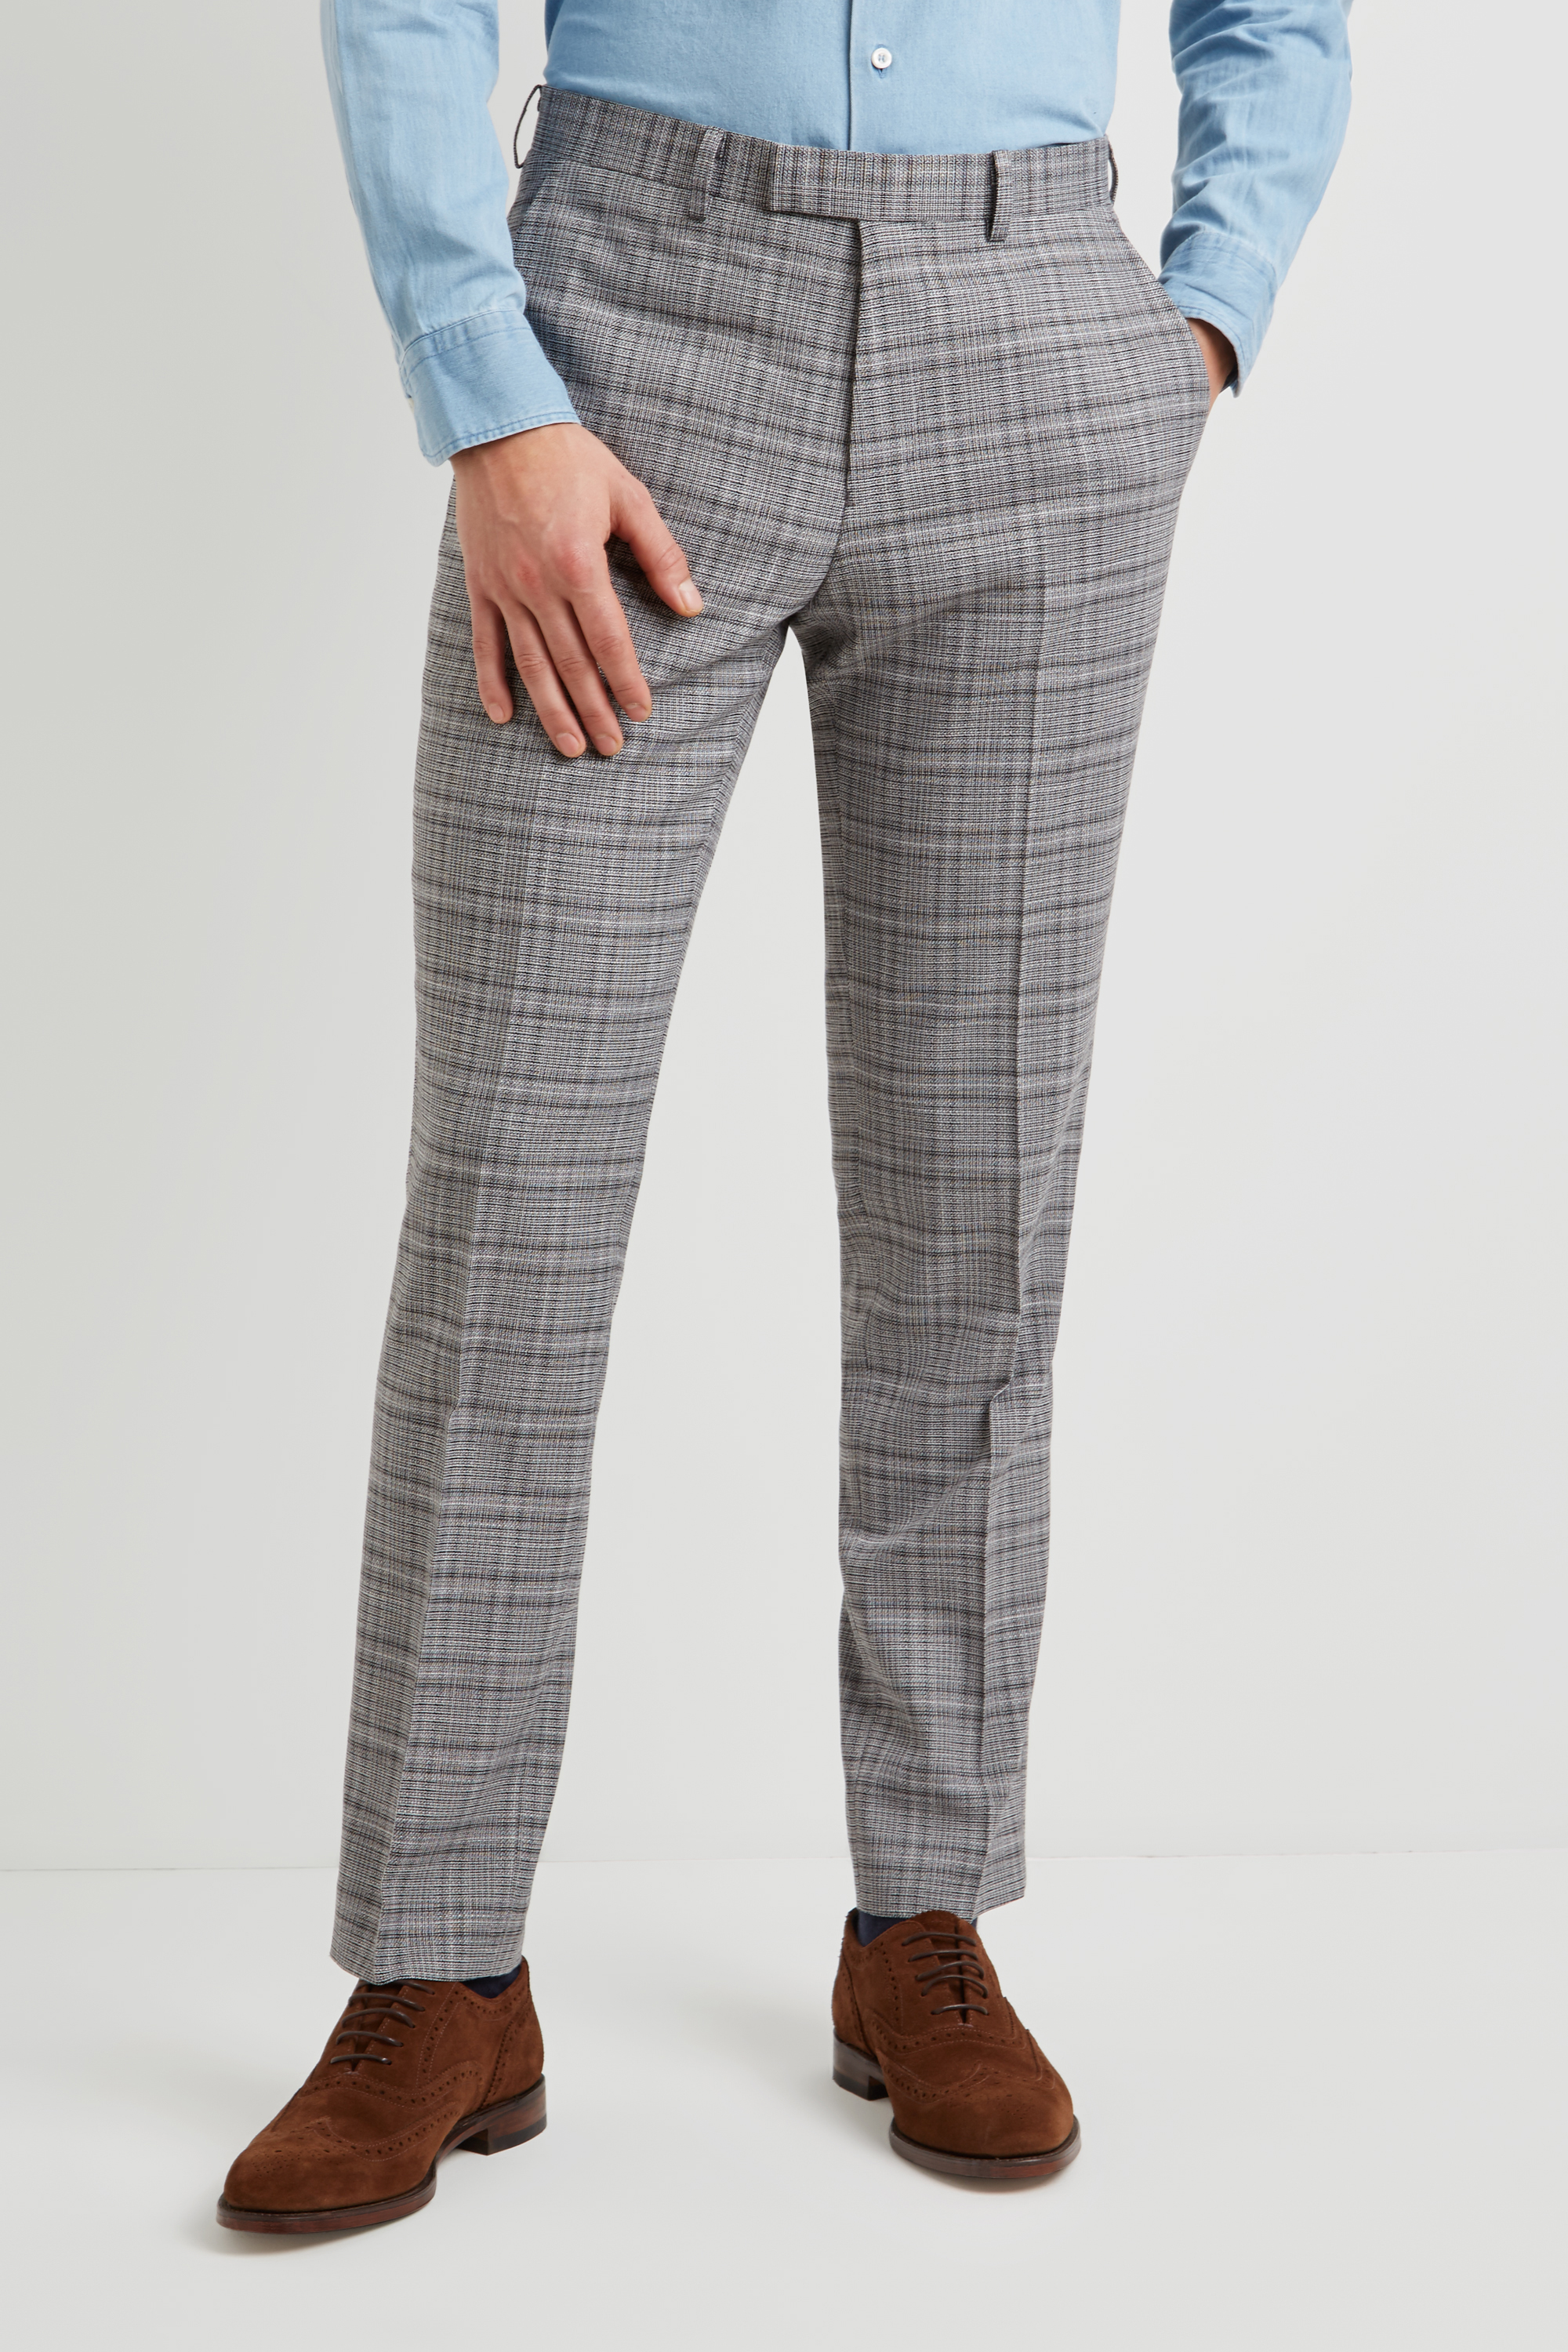 Moss 1851 Tailored Fit Black and White Twist Check Trousers